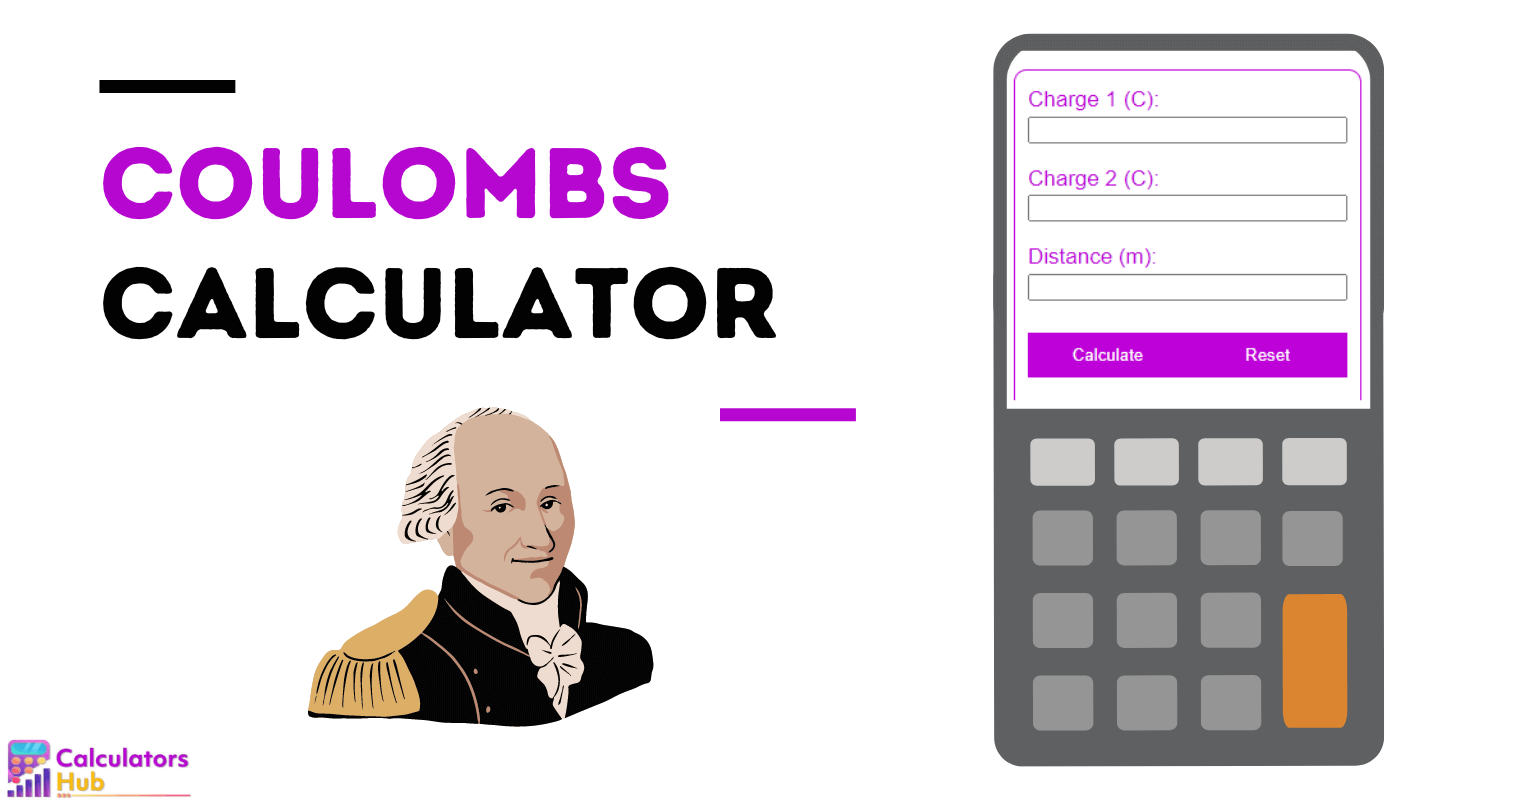 Coulombs Calculator